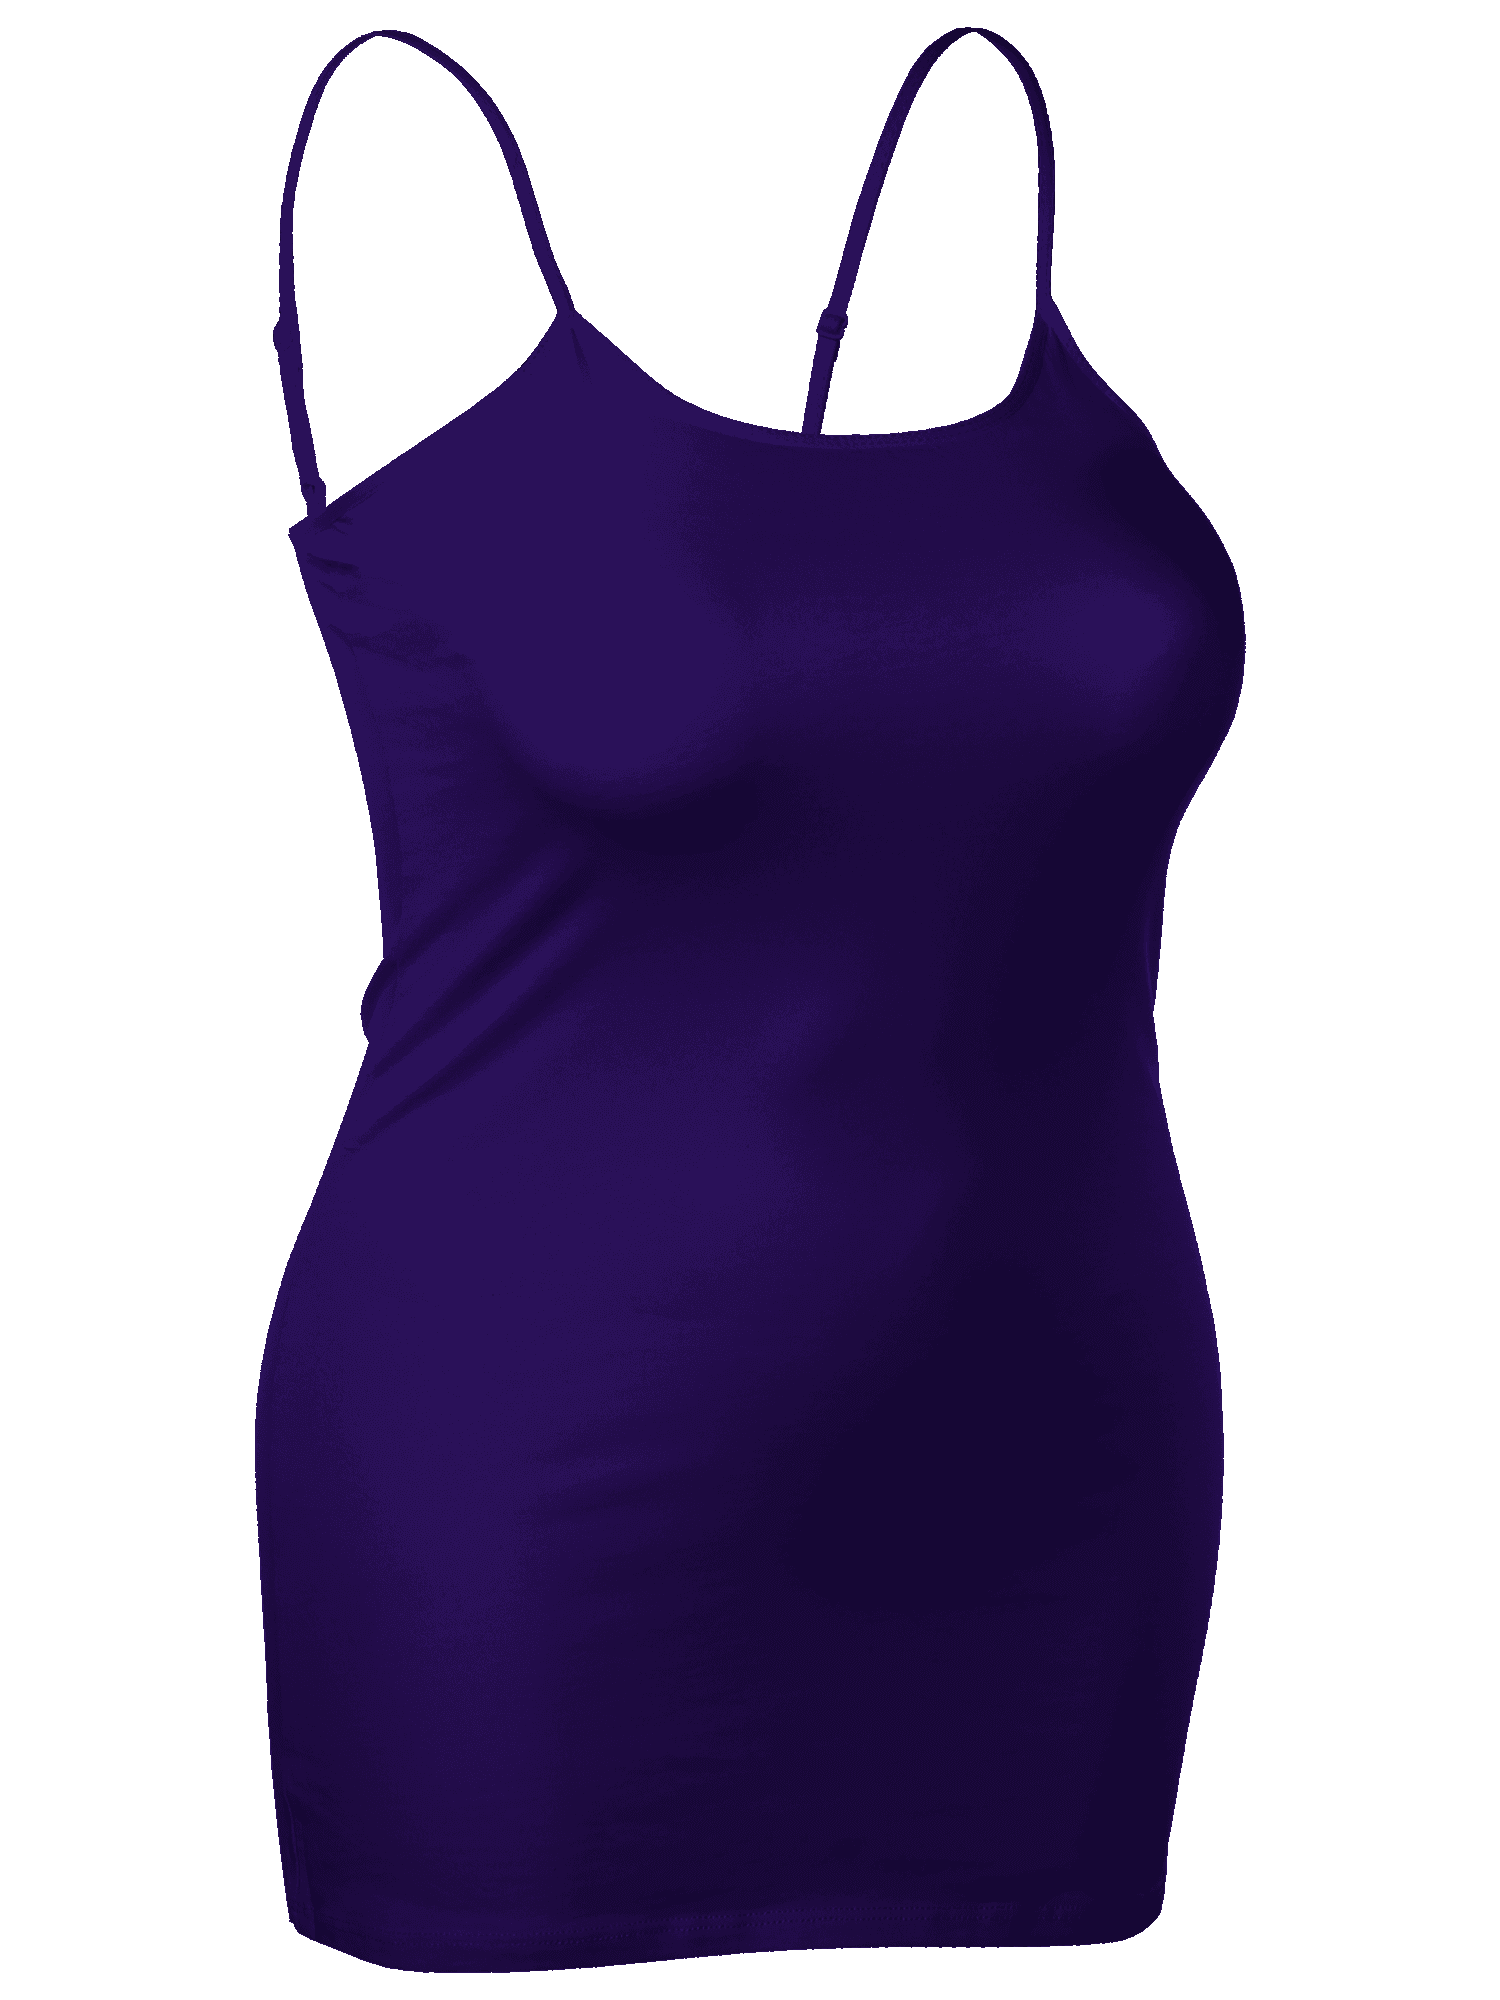 Emmalise Women's Basic Casual Long Camisole Adjustable Strap Cami Layering  Top, 3xl, Purple 